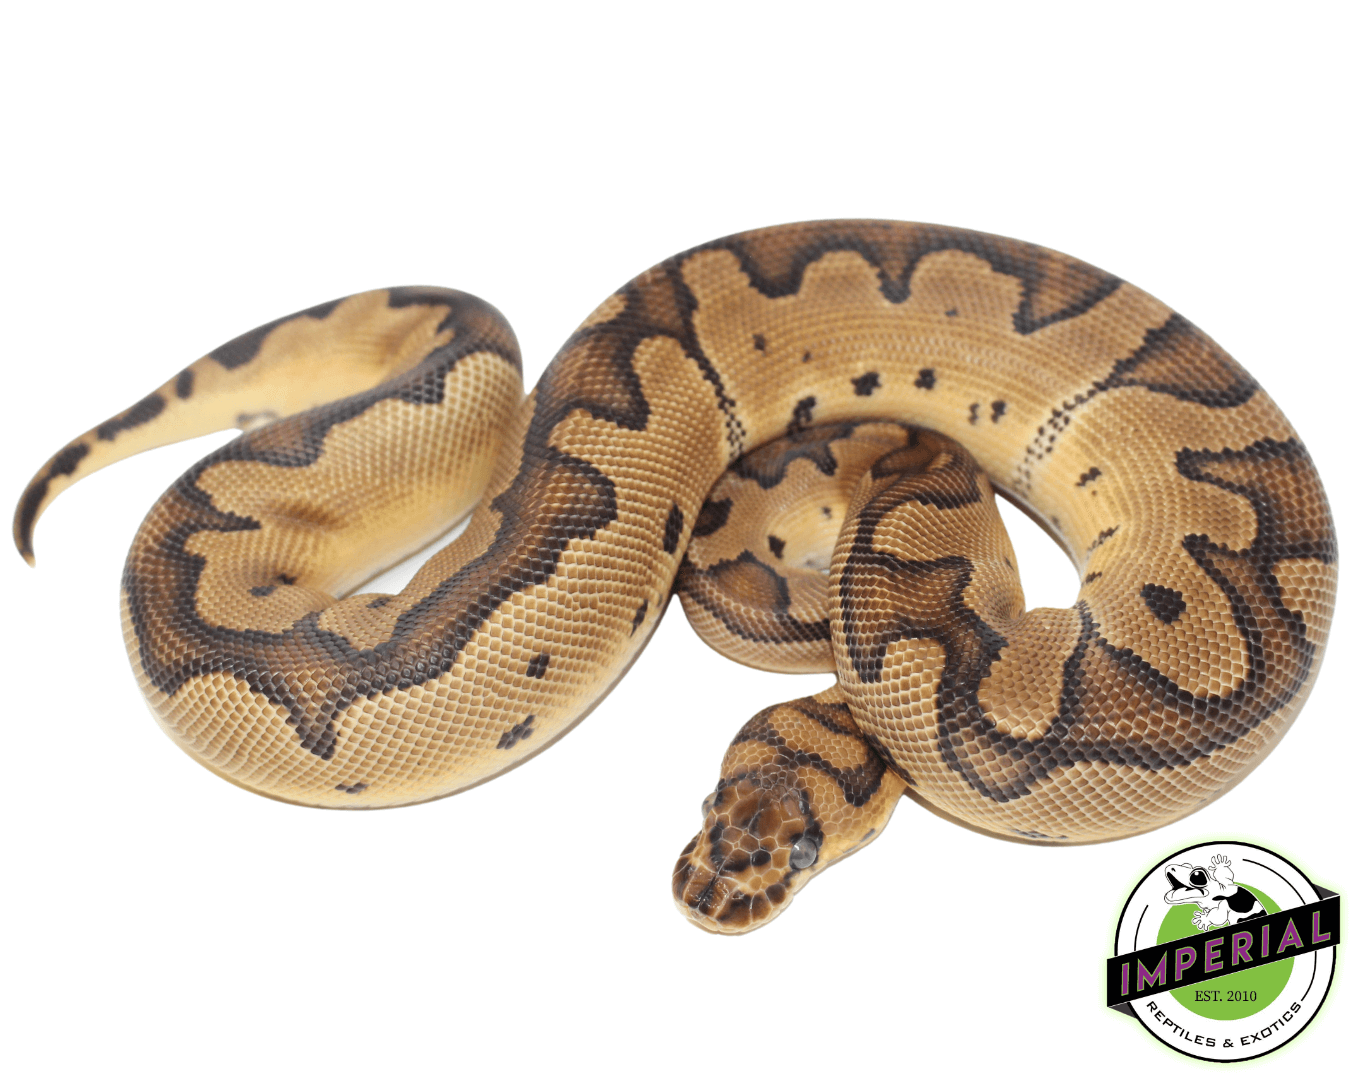 Blade Clown ball python for sale, buy reptiles online